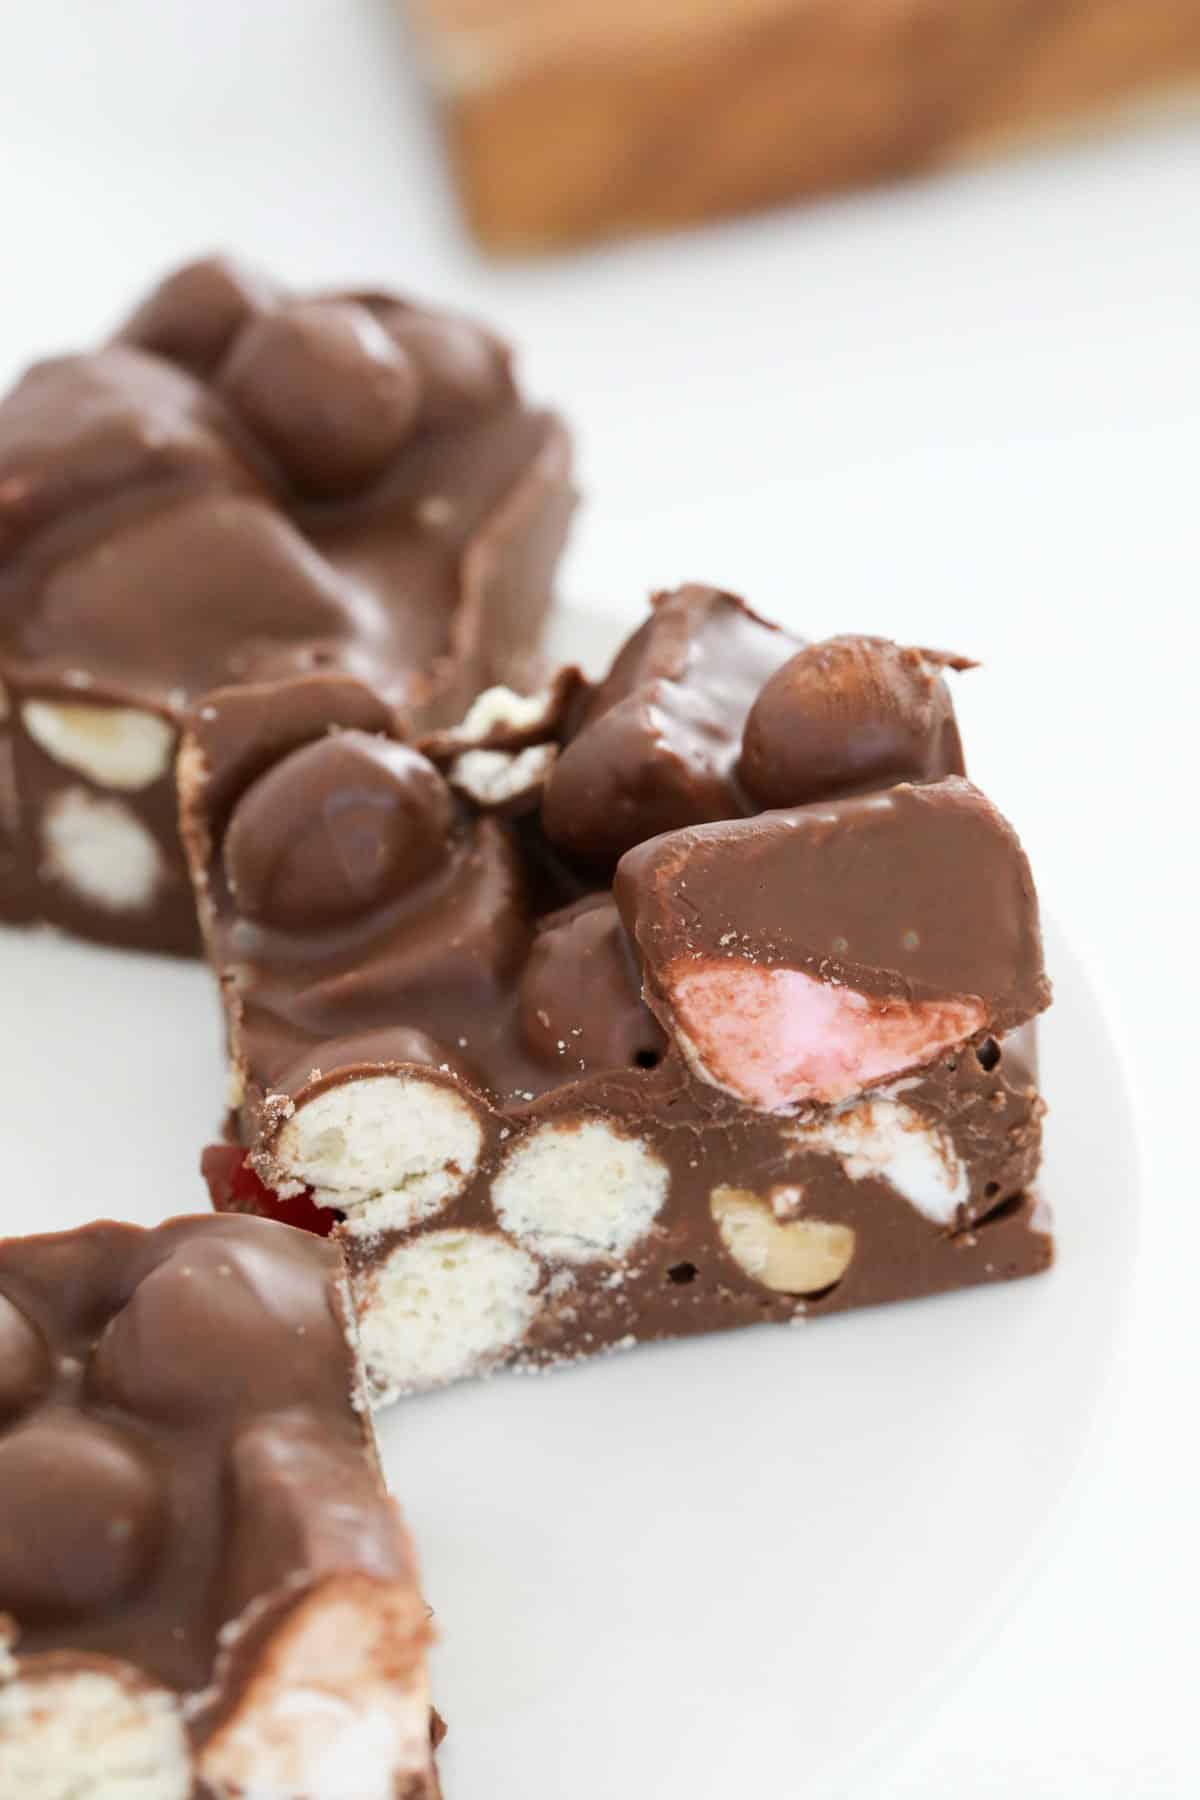 Malteser slice with marshmallows and raspberry lollies.